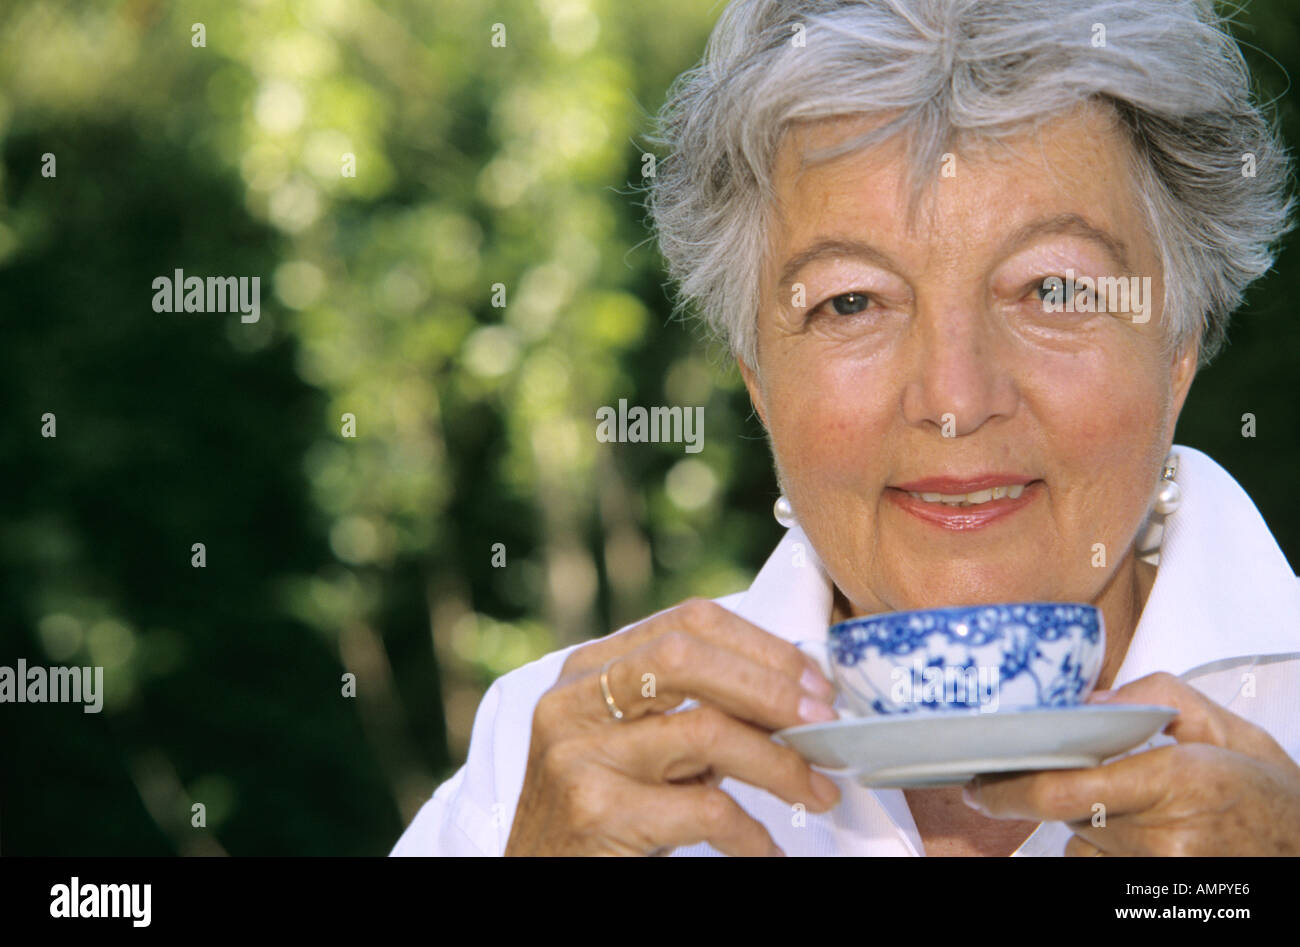 Senior woman holding cup of tea, close-up Banque D'Images